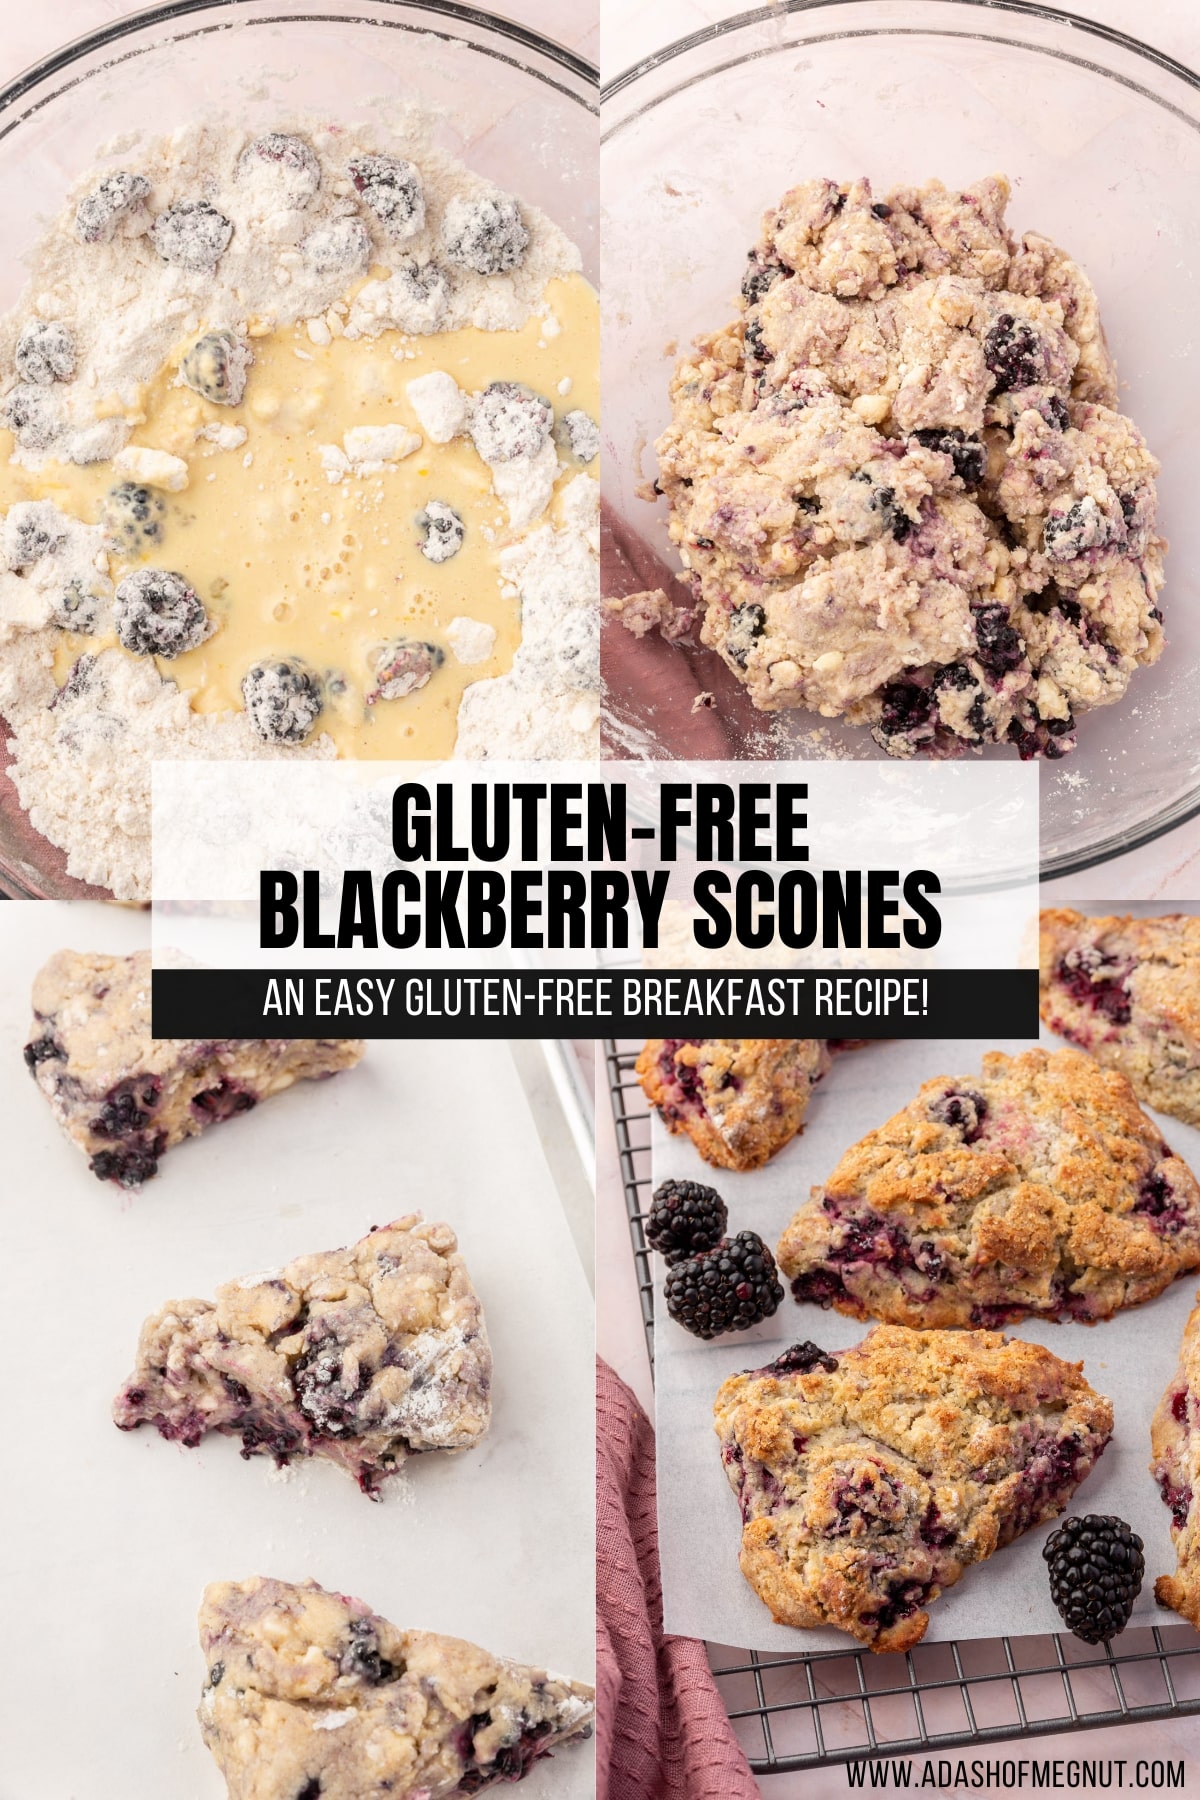 A four photo collage showing the process of making gluten free blackberry scones. Photo 1: A glass mixing bowl with gluten-free flour, blackberries and a buttermilk mixture before combining together. Photo 2: A glass mixing bowl with a gluten-free blackberry scone dough in it. Photo 3: Gluten free blackberry scone dough wedges on a baking sheet before baking in the oven. Photo 4: Gluten-free blackberry scones on a wire cooling rack lined with parchment paper with fresh blackberries surrounding the scones.